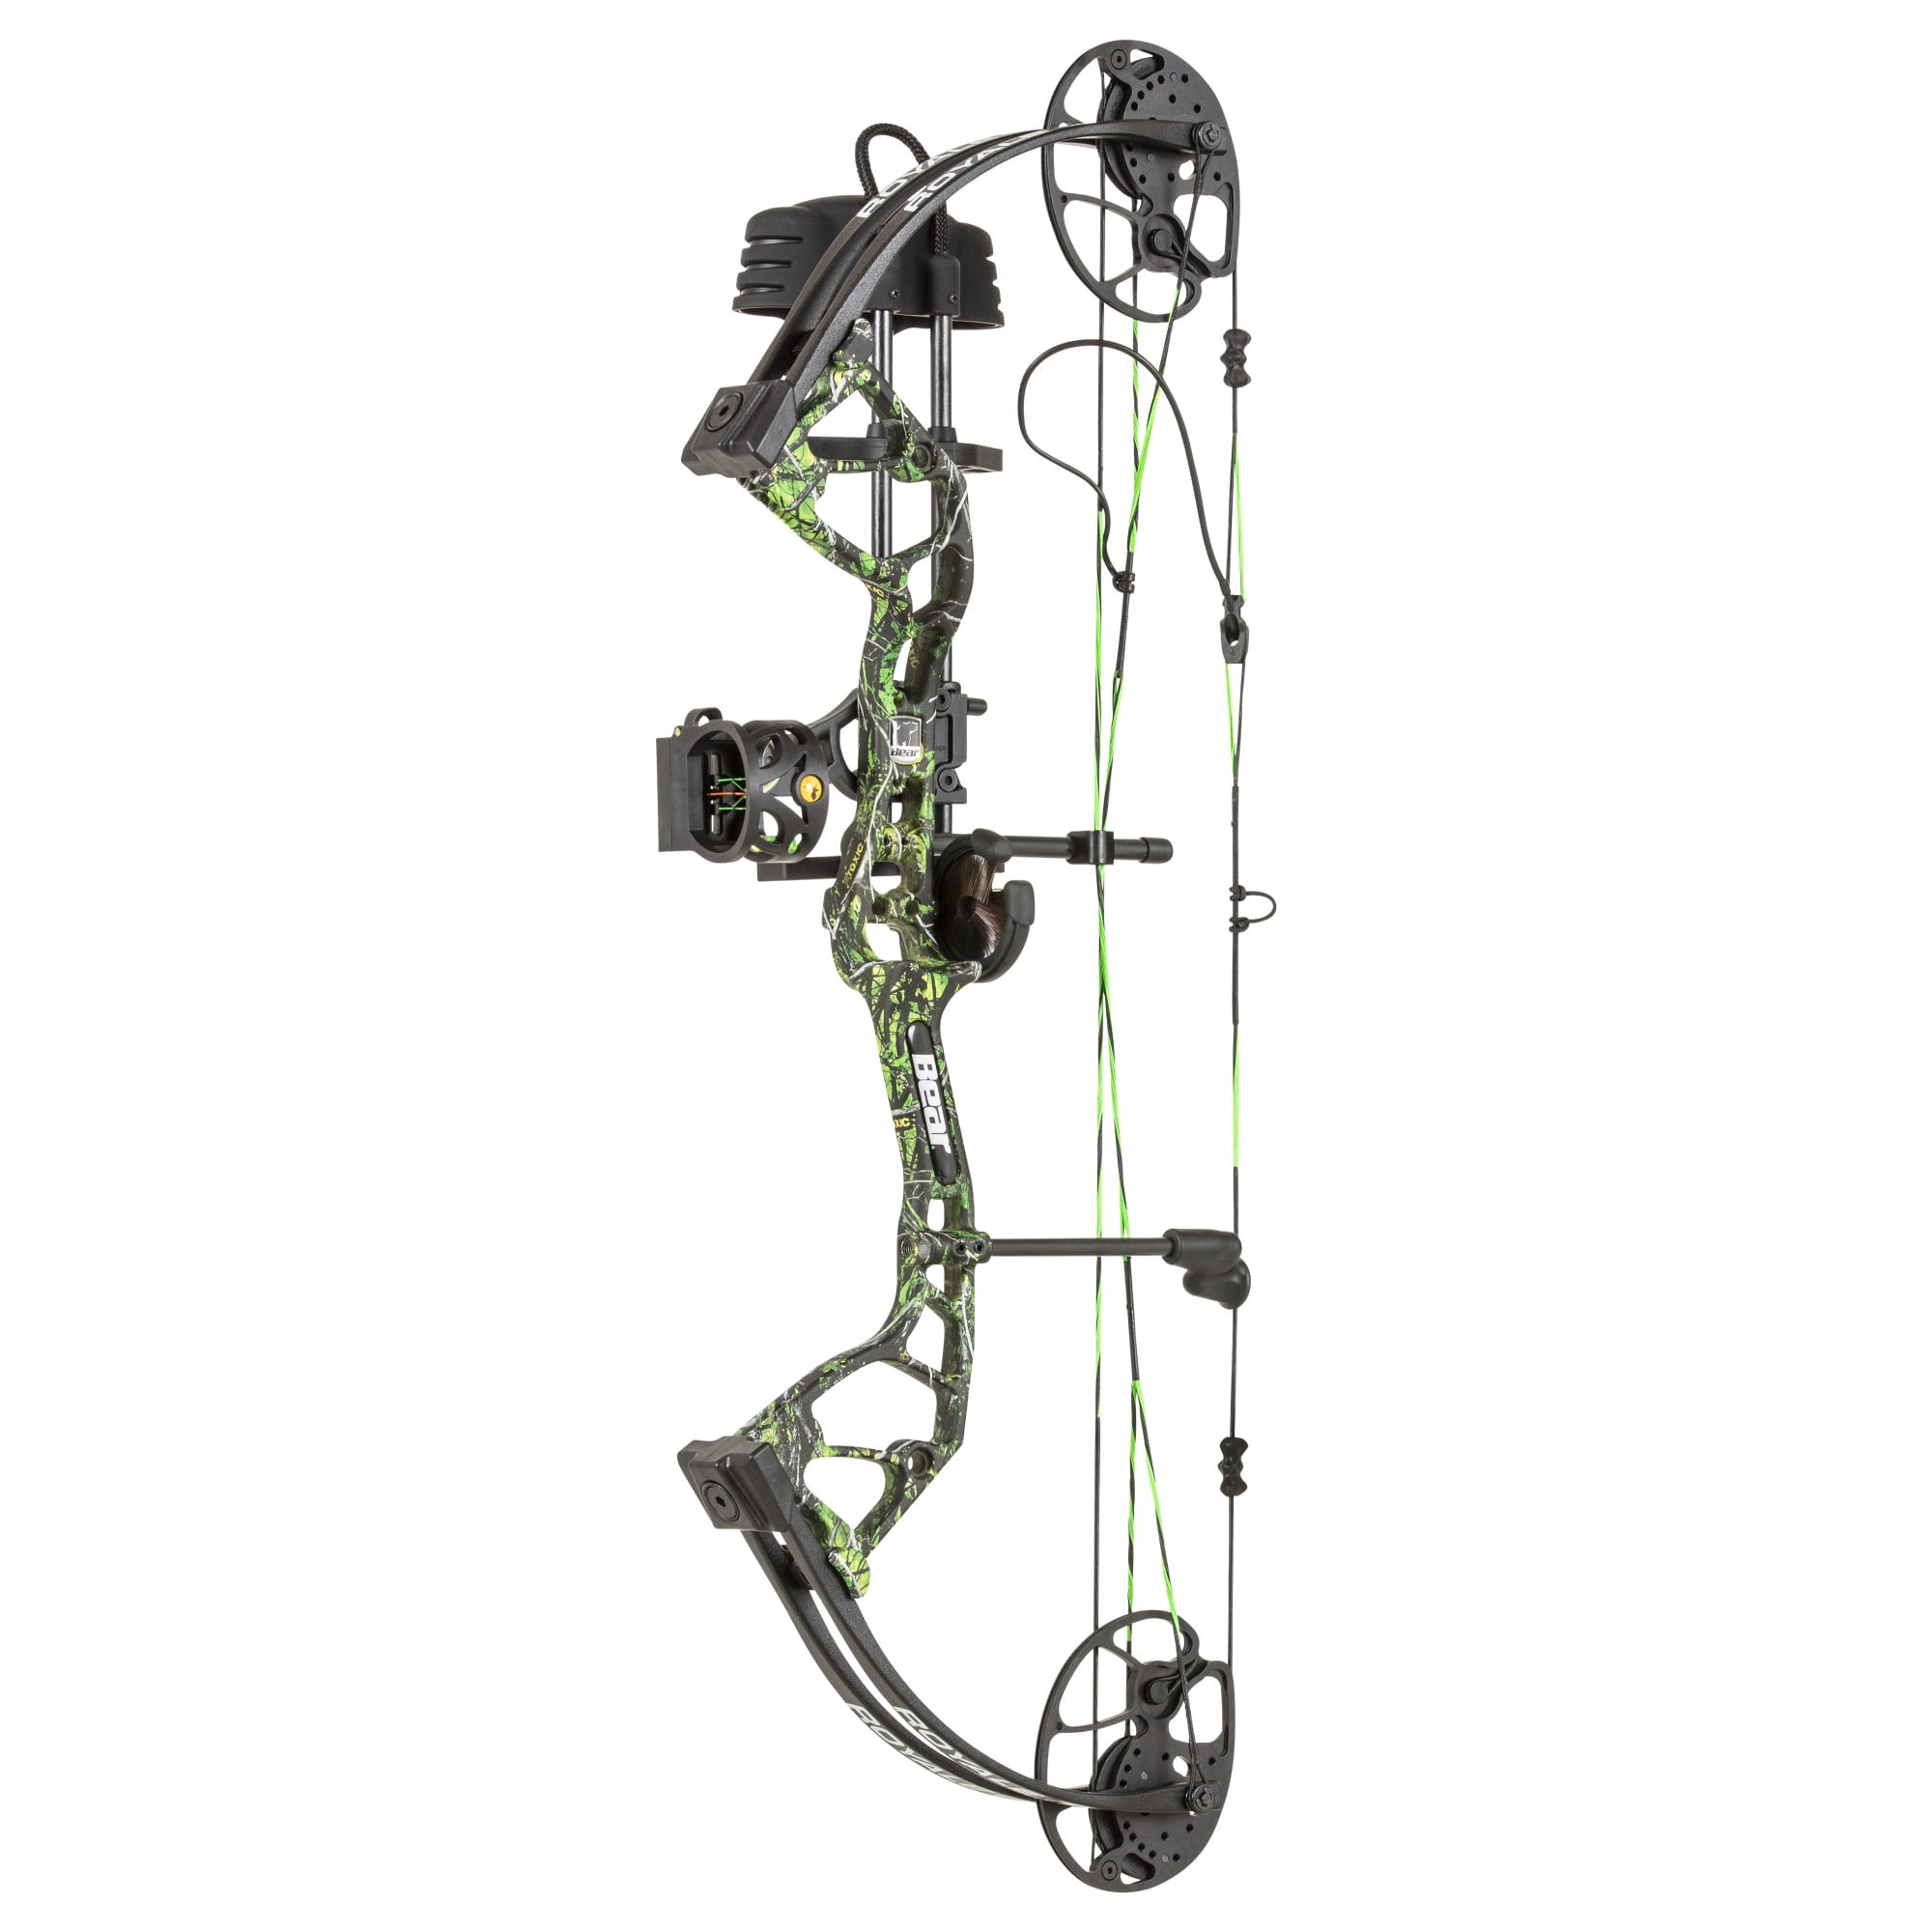 Bear Archery Royale RTH Compound Bow with 5-50 lbs Archery Hunting Package 